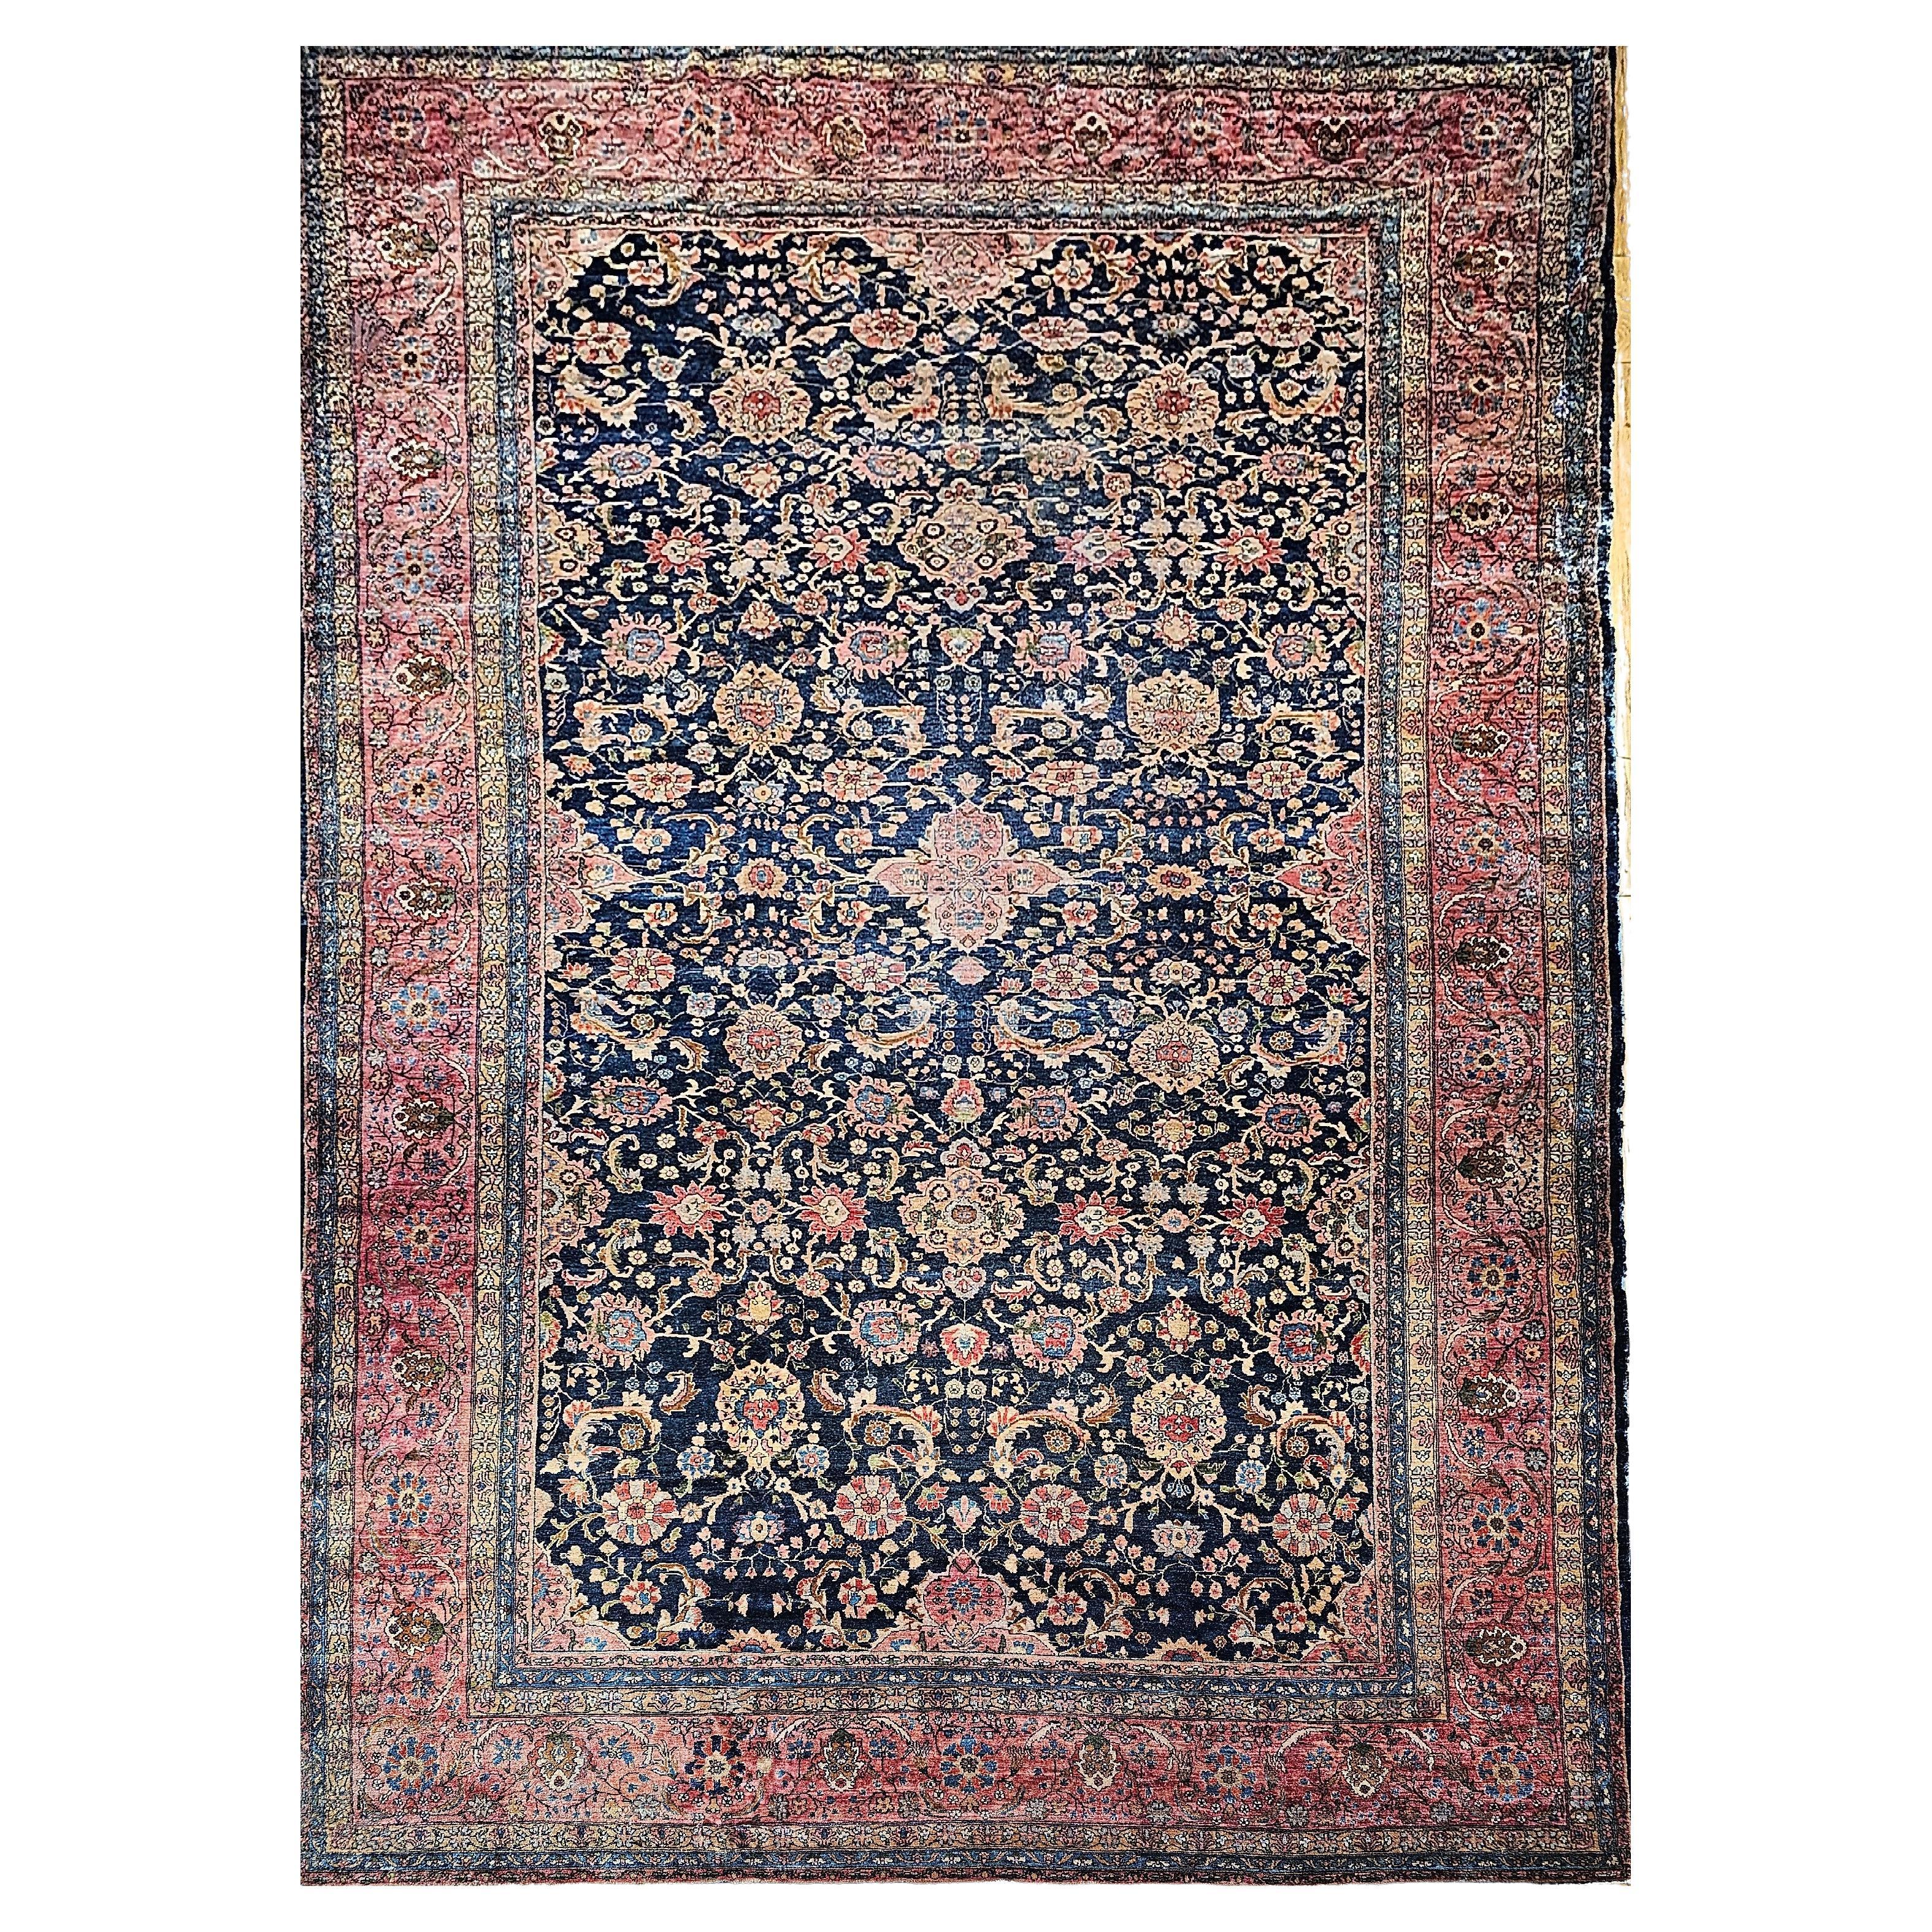 19th Century Oversize Persian Farahan in Allover Floral Pattern in Navy, Red